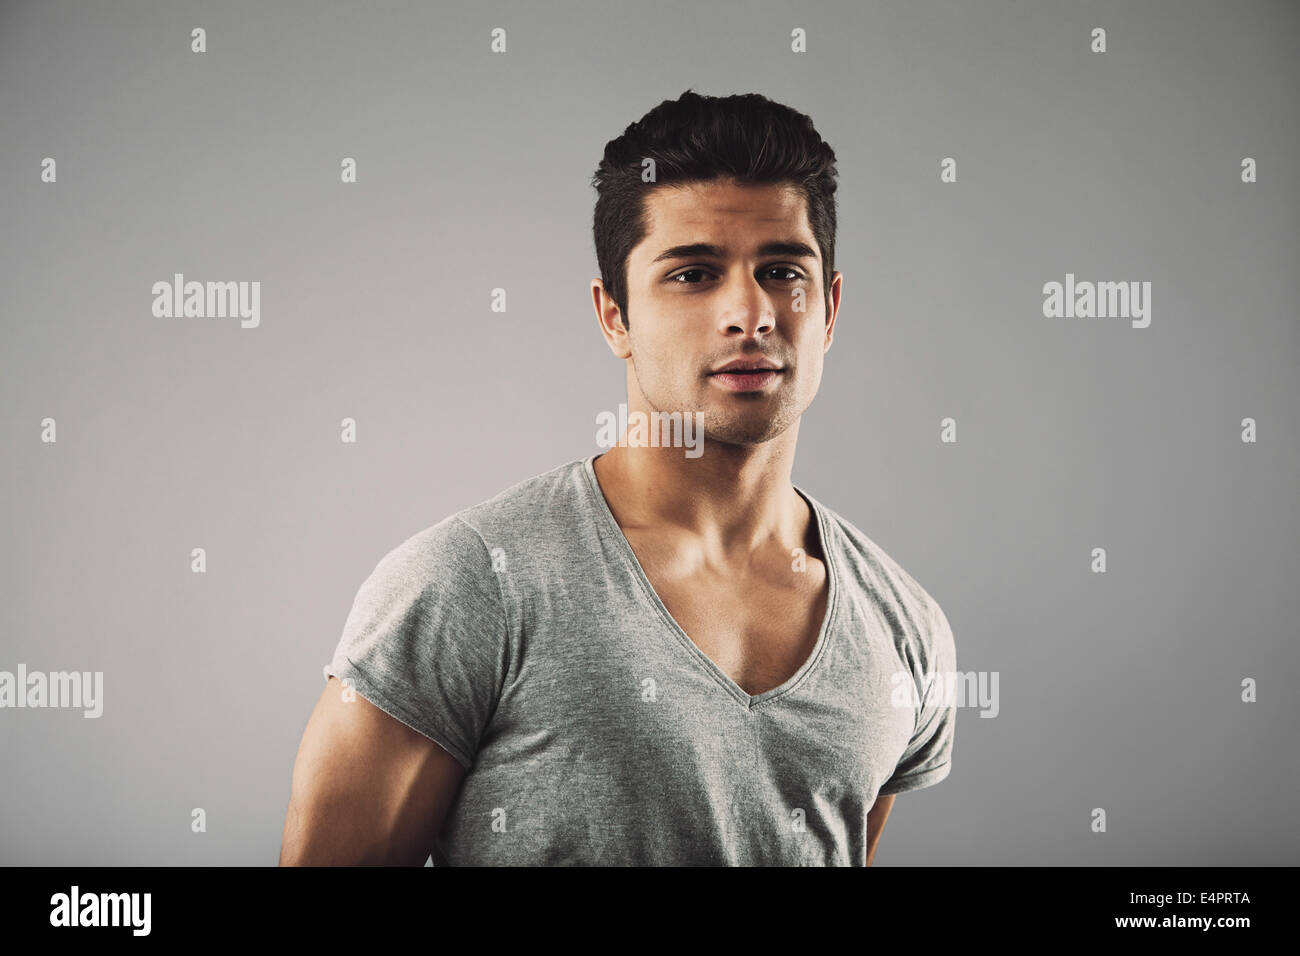 Portrait of handsome young man looking at camera. Hispanic male fashion model posing against grey background. Stock Photo